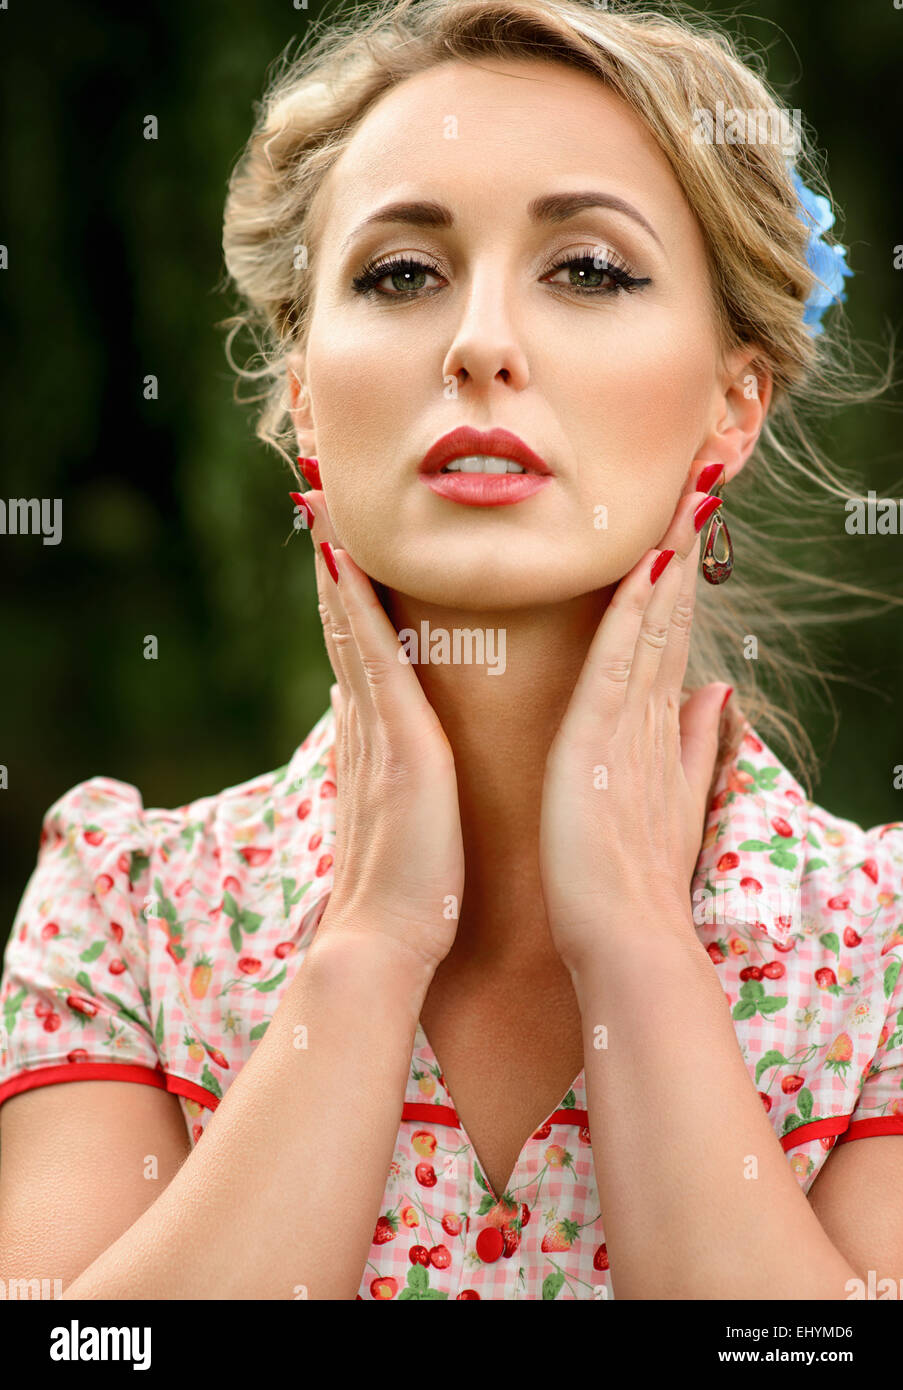 Portrait of a mid adult woman holding her hands to her face Stock Photo